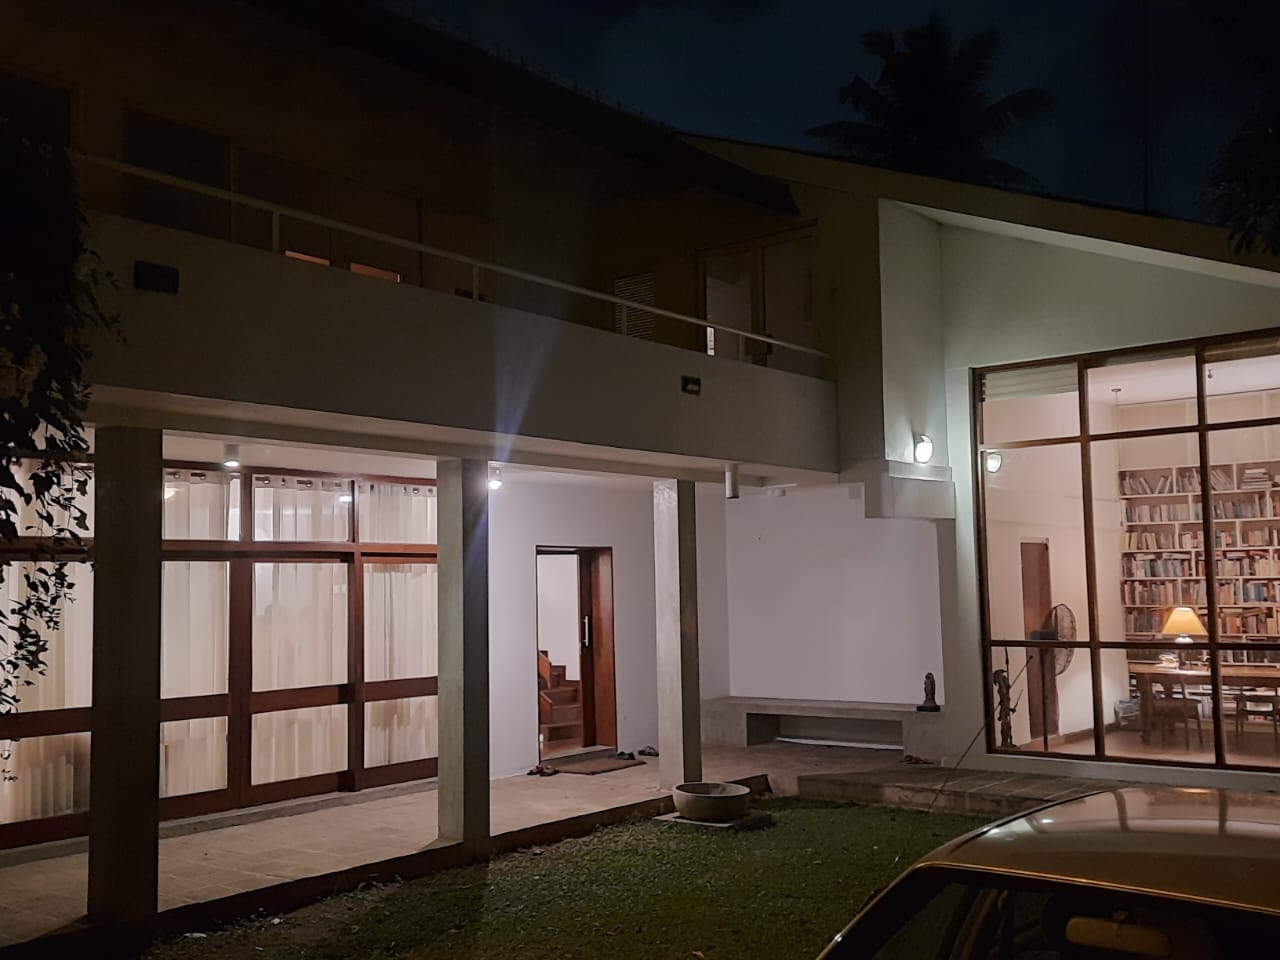 Fully furnished house for rent in Colombo 08 - 4 Bedrooms - 600,000 per Month